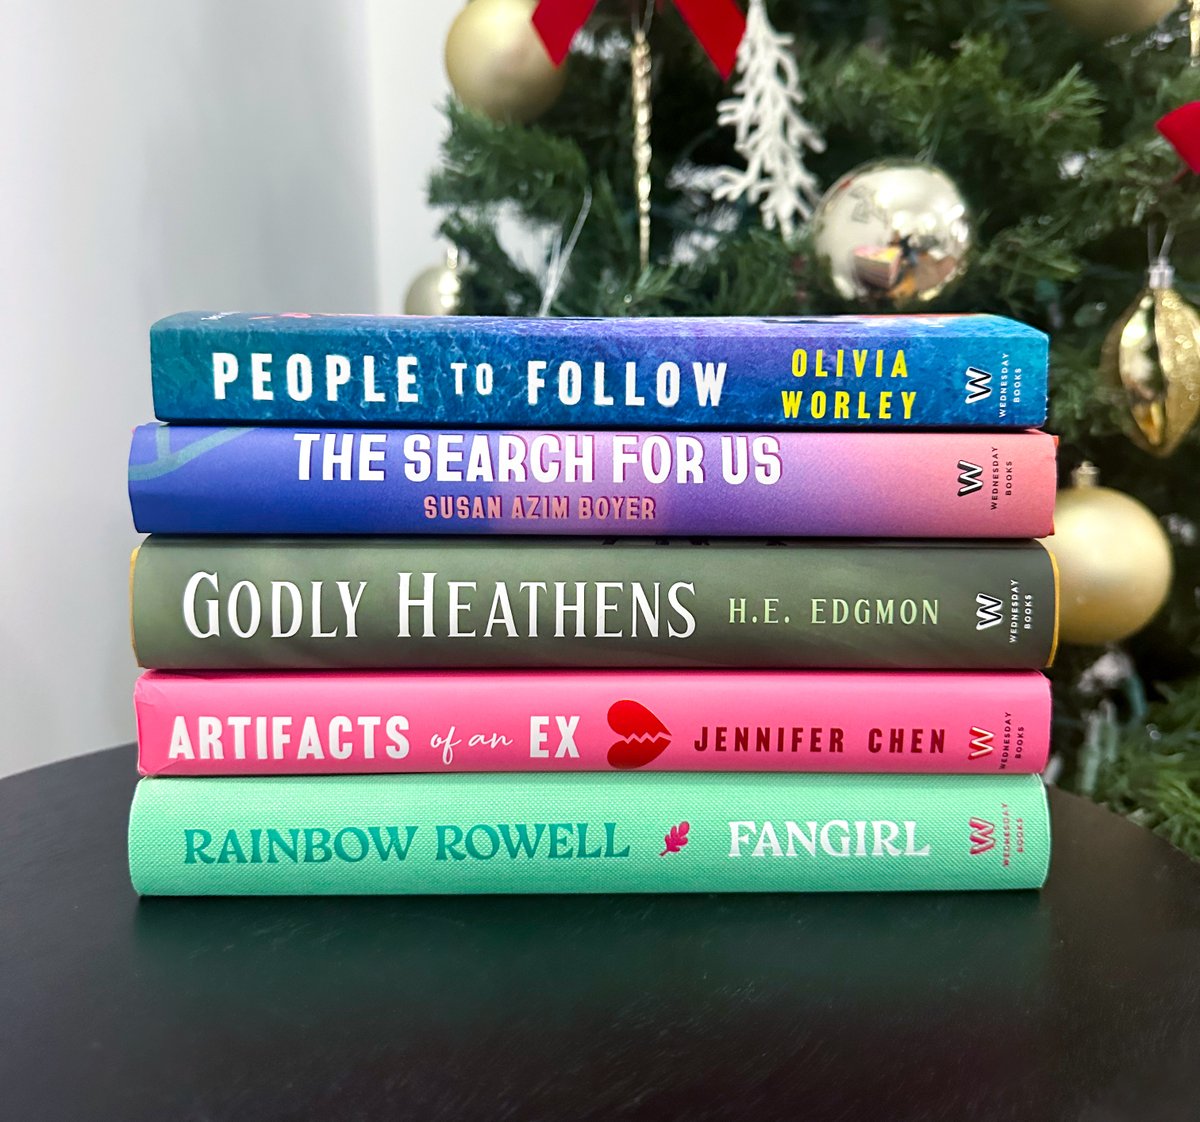 'Tis the season to find the perfect gift! 🎁 From heart-warming romances to intriguing mysteries, let us help you find the perfect book for the readers in your life. Check out our full Holiday Gift Guide now! wednesdaybooks.com/holiday-gift-g…